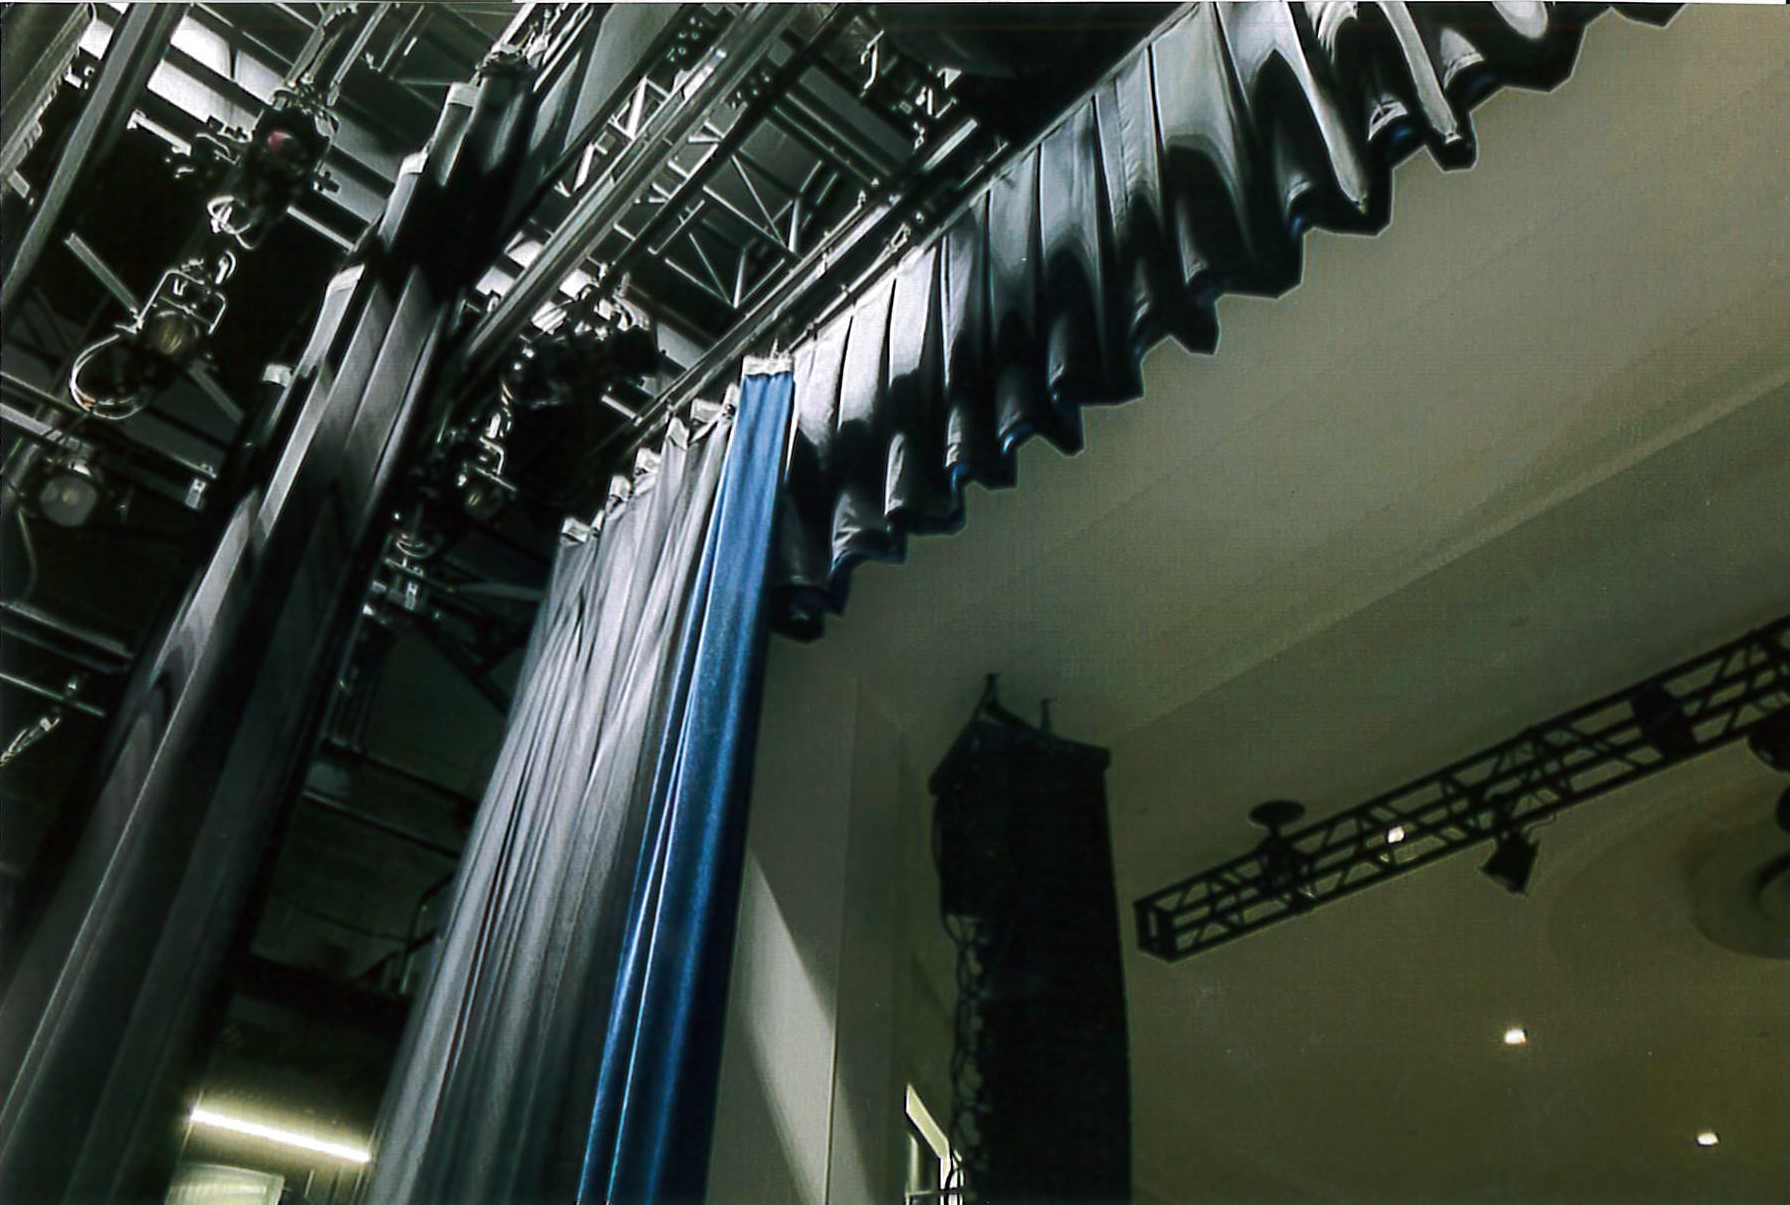 After Presidio view of stage curtains and lighting